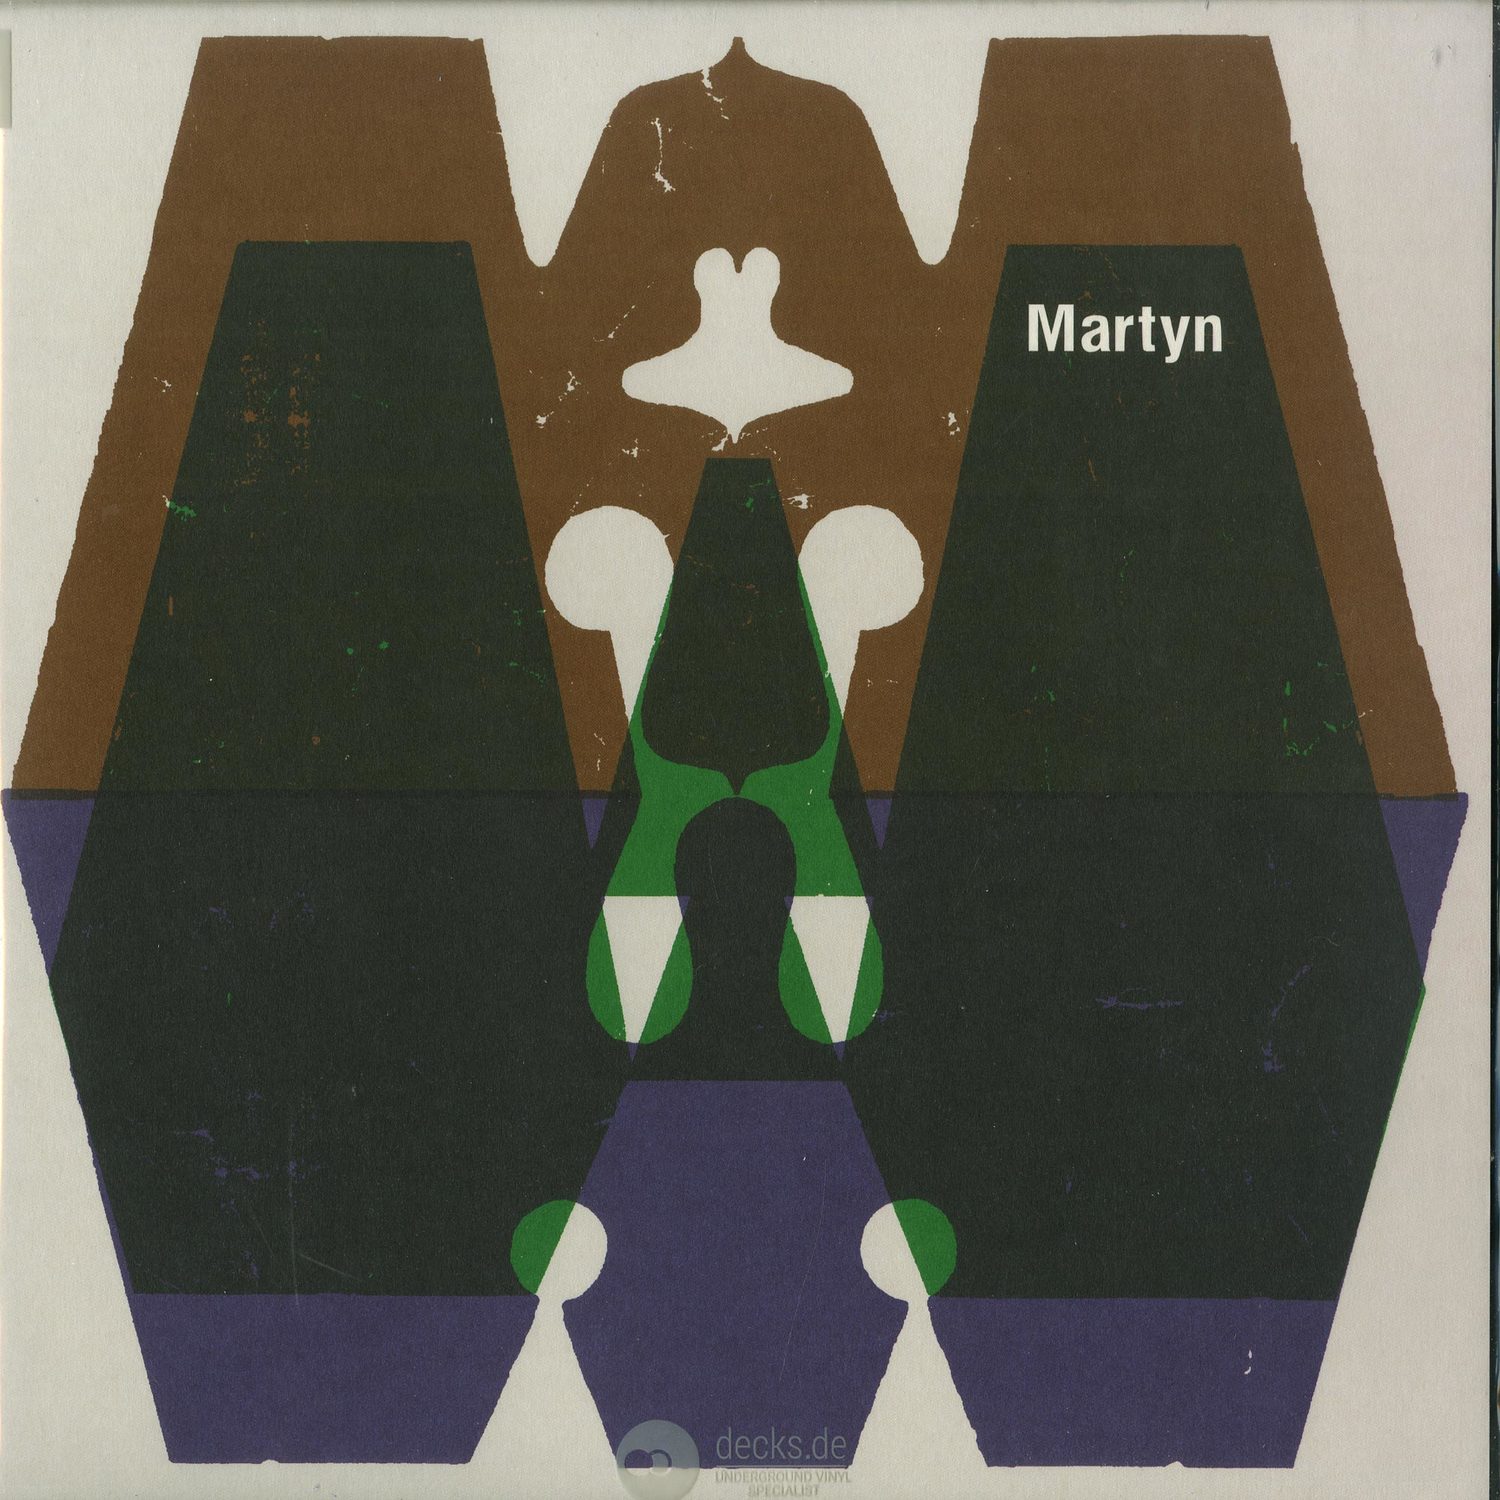 Martyn - ODDS AGAINST US